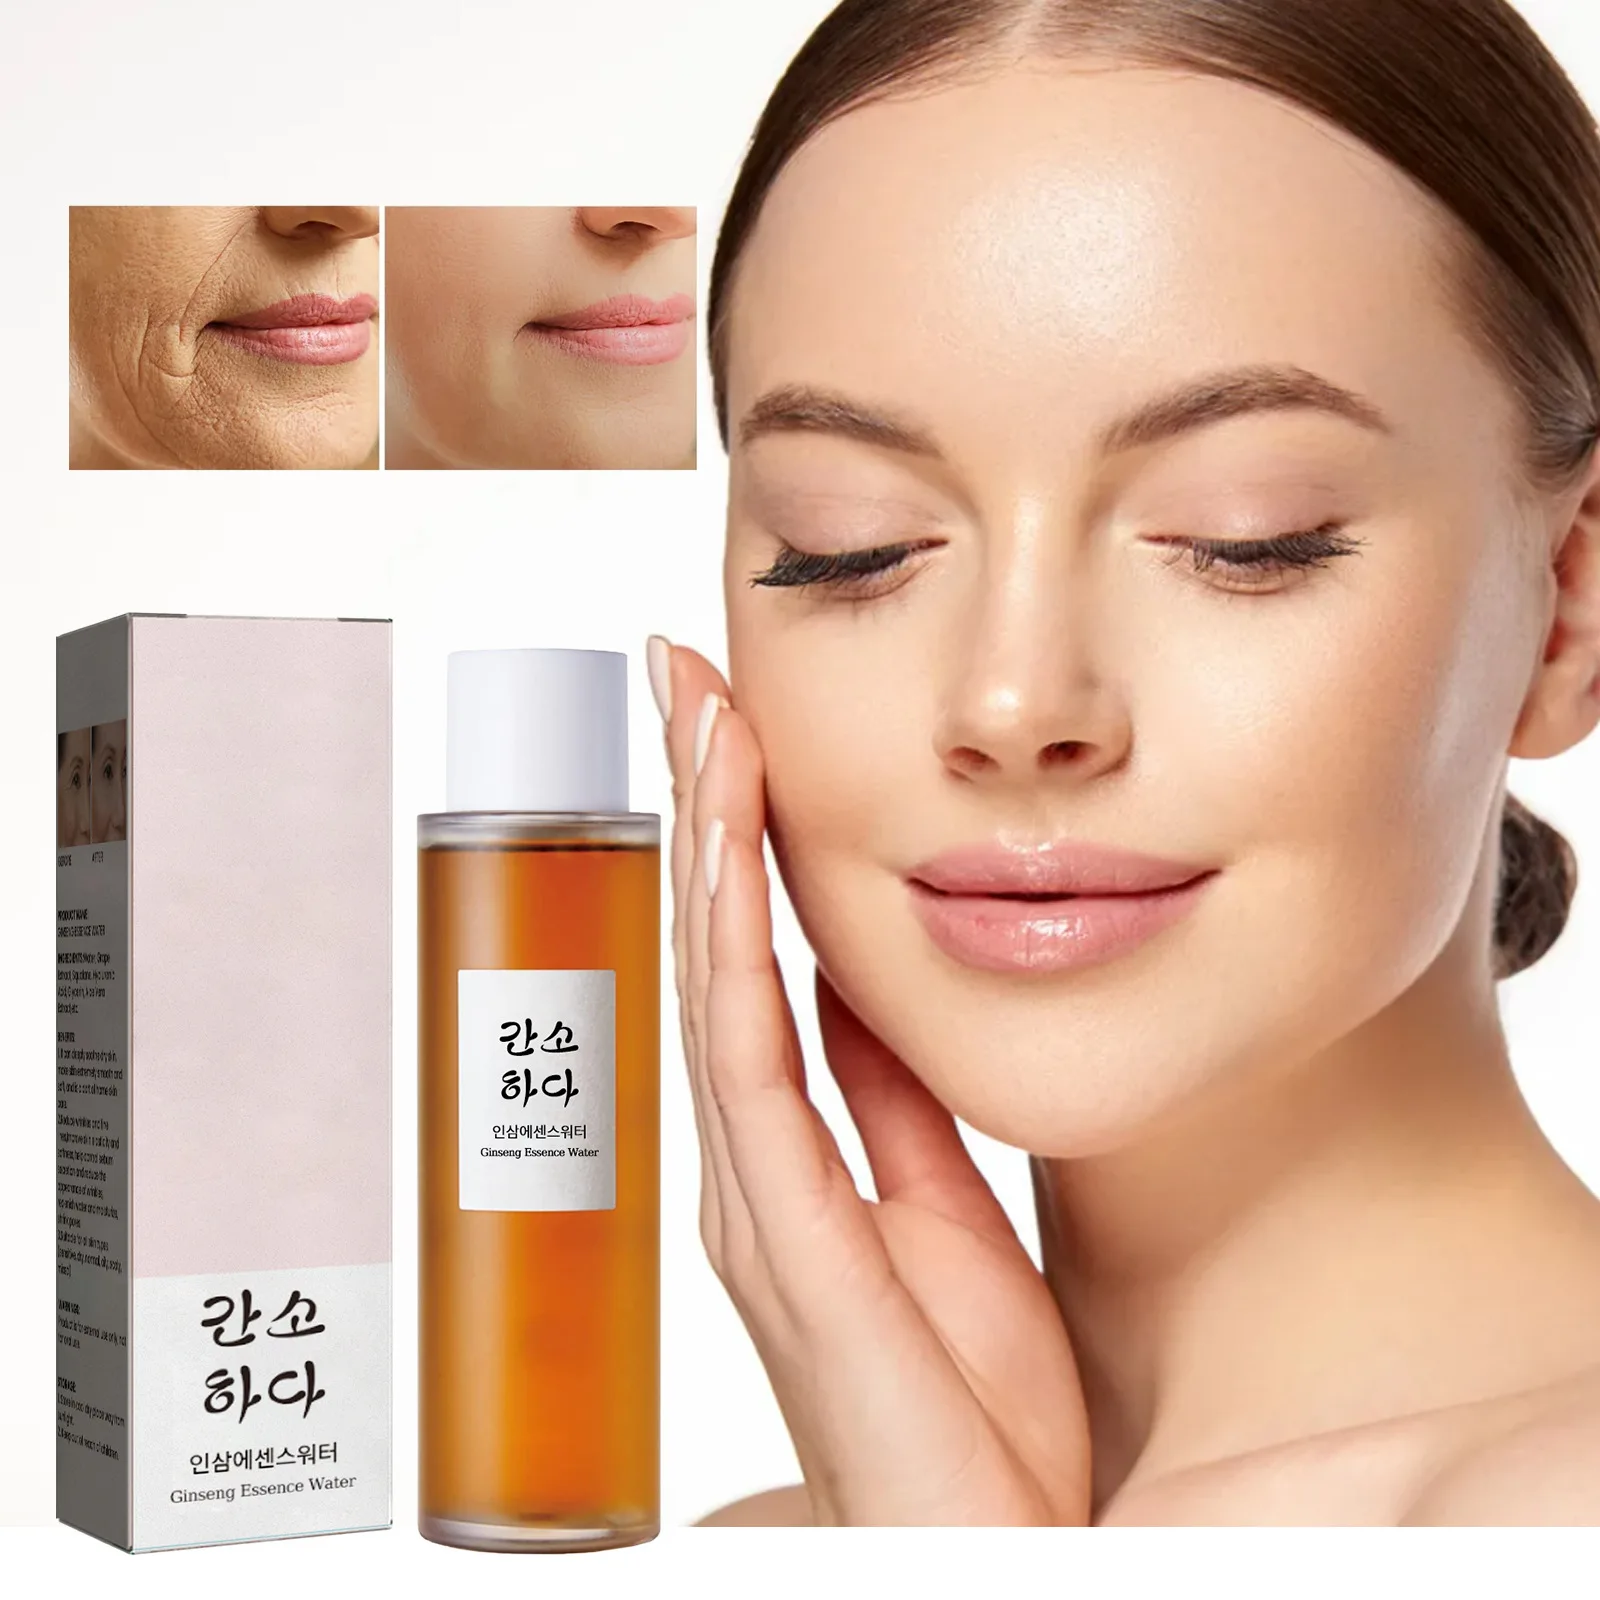 

Ginseng Essence Water Moisturizes Repair Dull Fades Fine Lines Restore Skin Elasticity Brightens Complexion Anti-Wrinkle Essence